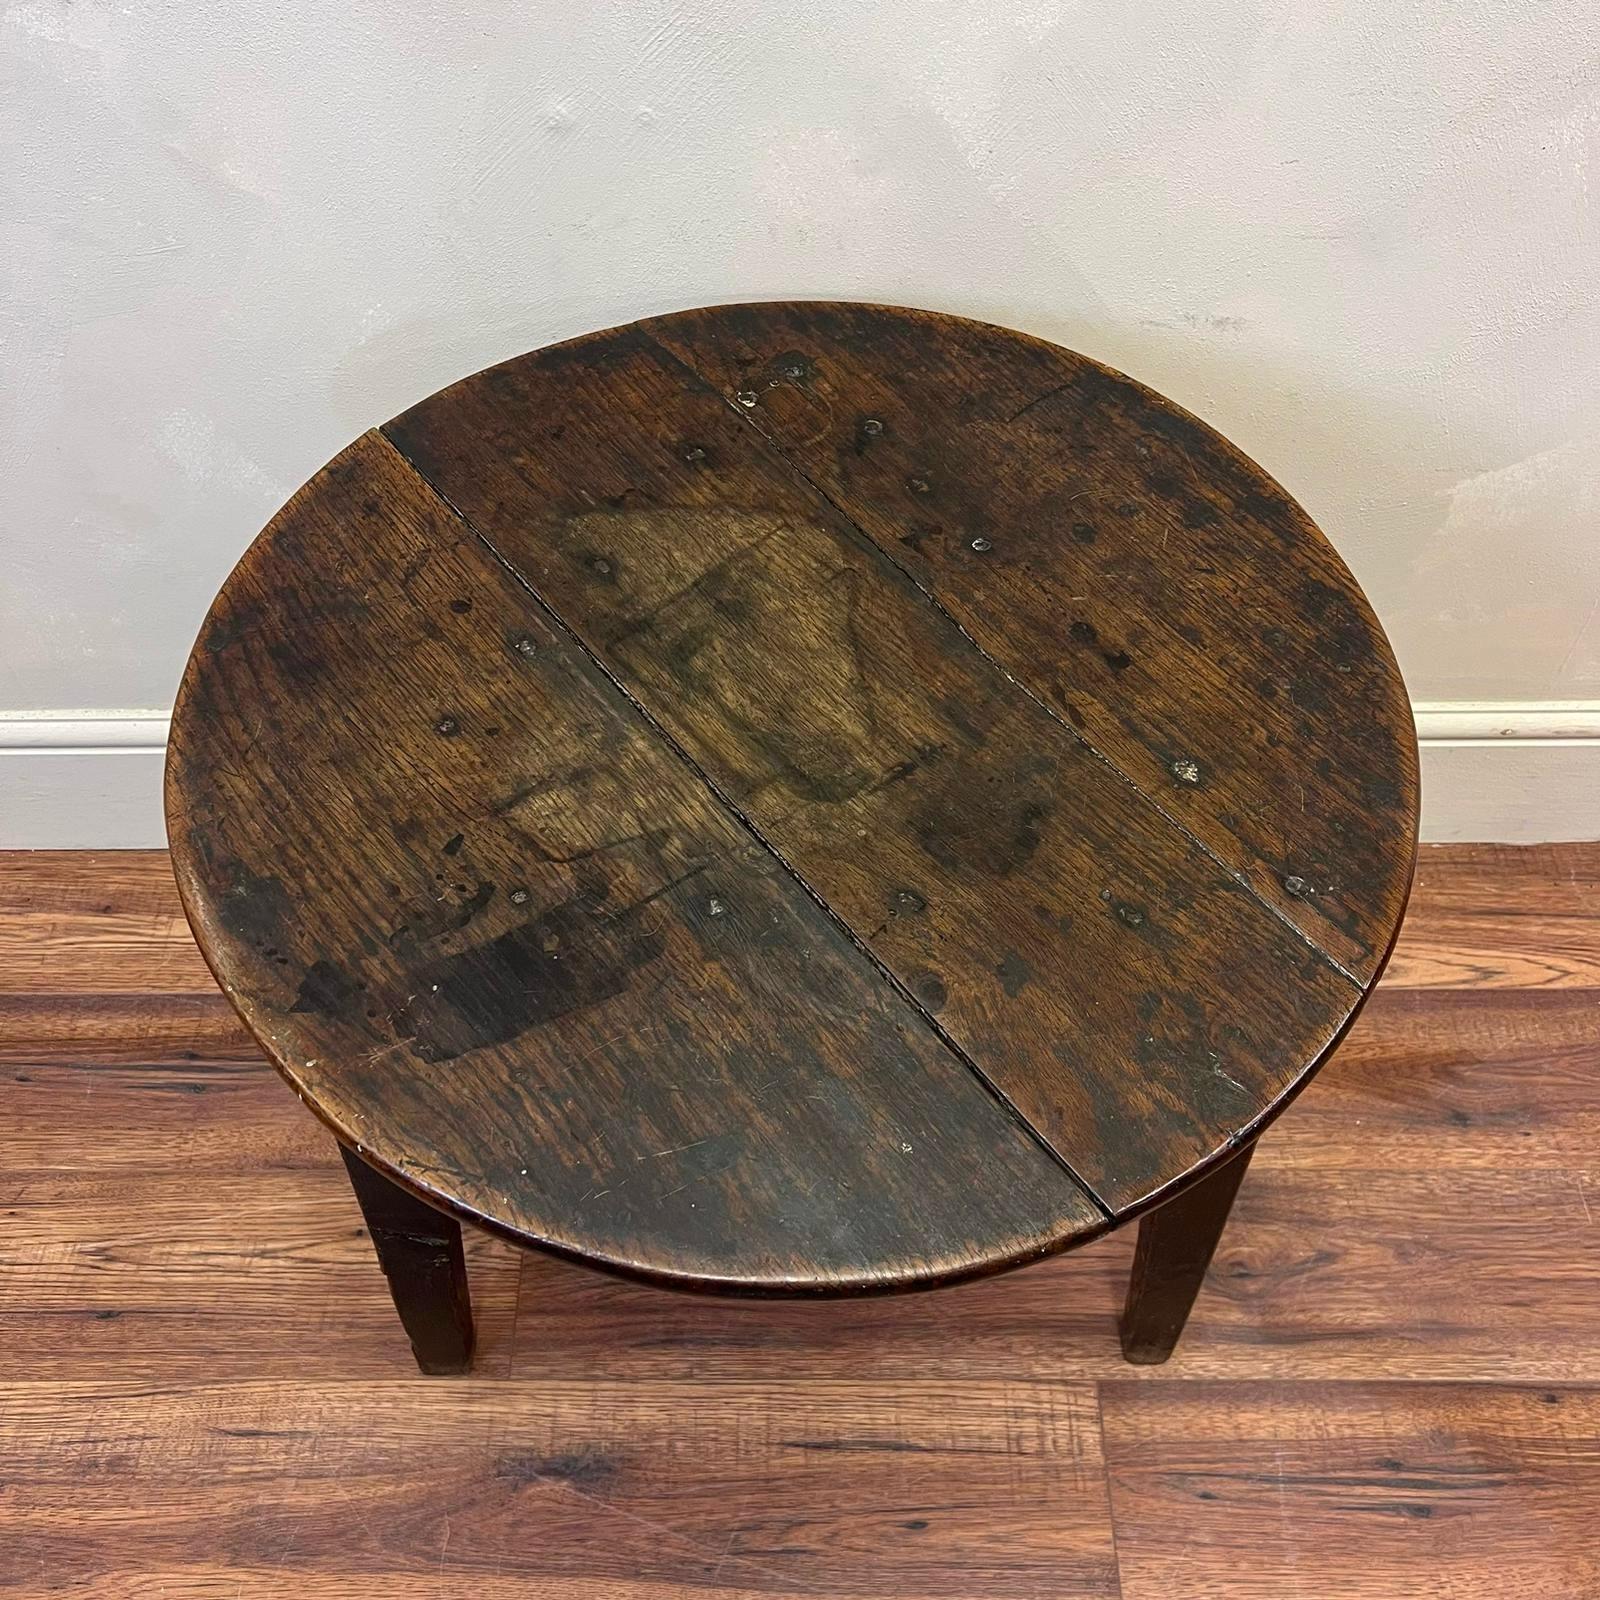 Welsh, yew and oak Cricket Table circa 1800.
With scalloped apron and original rosehead nails.
This piece has years and years of wear and old repairs as shown , but very sturdy and just is part of its  history .

Height: 58.5cm
Top Diameter: